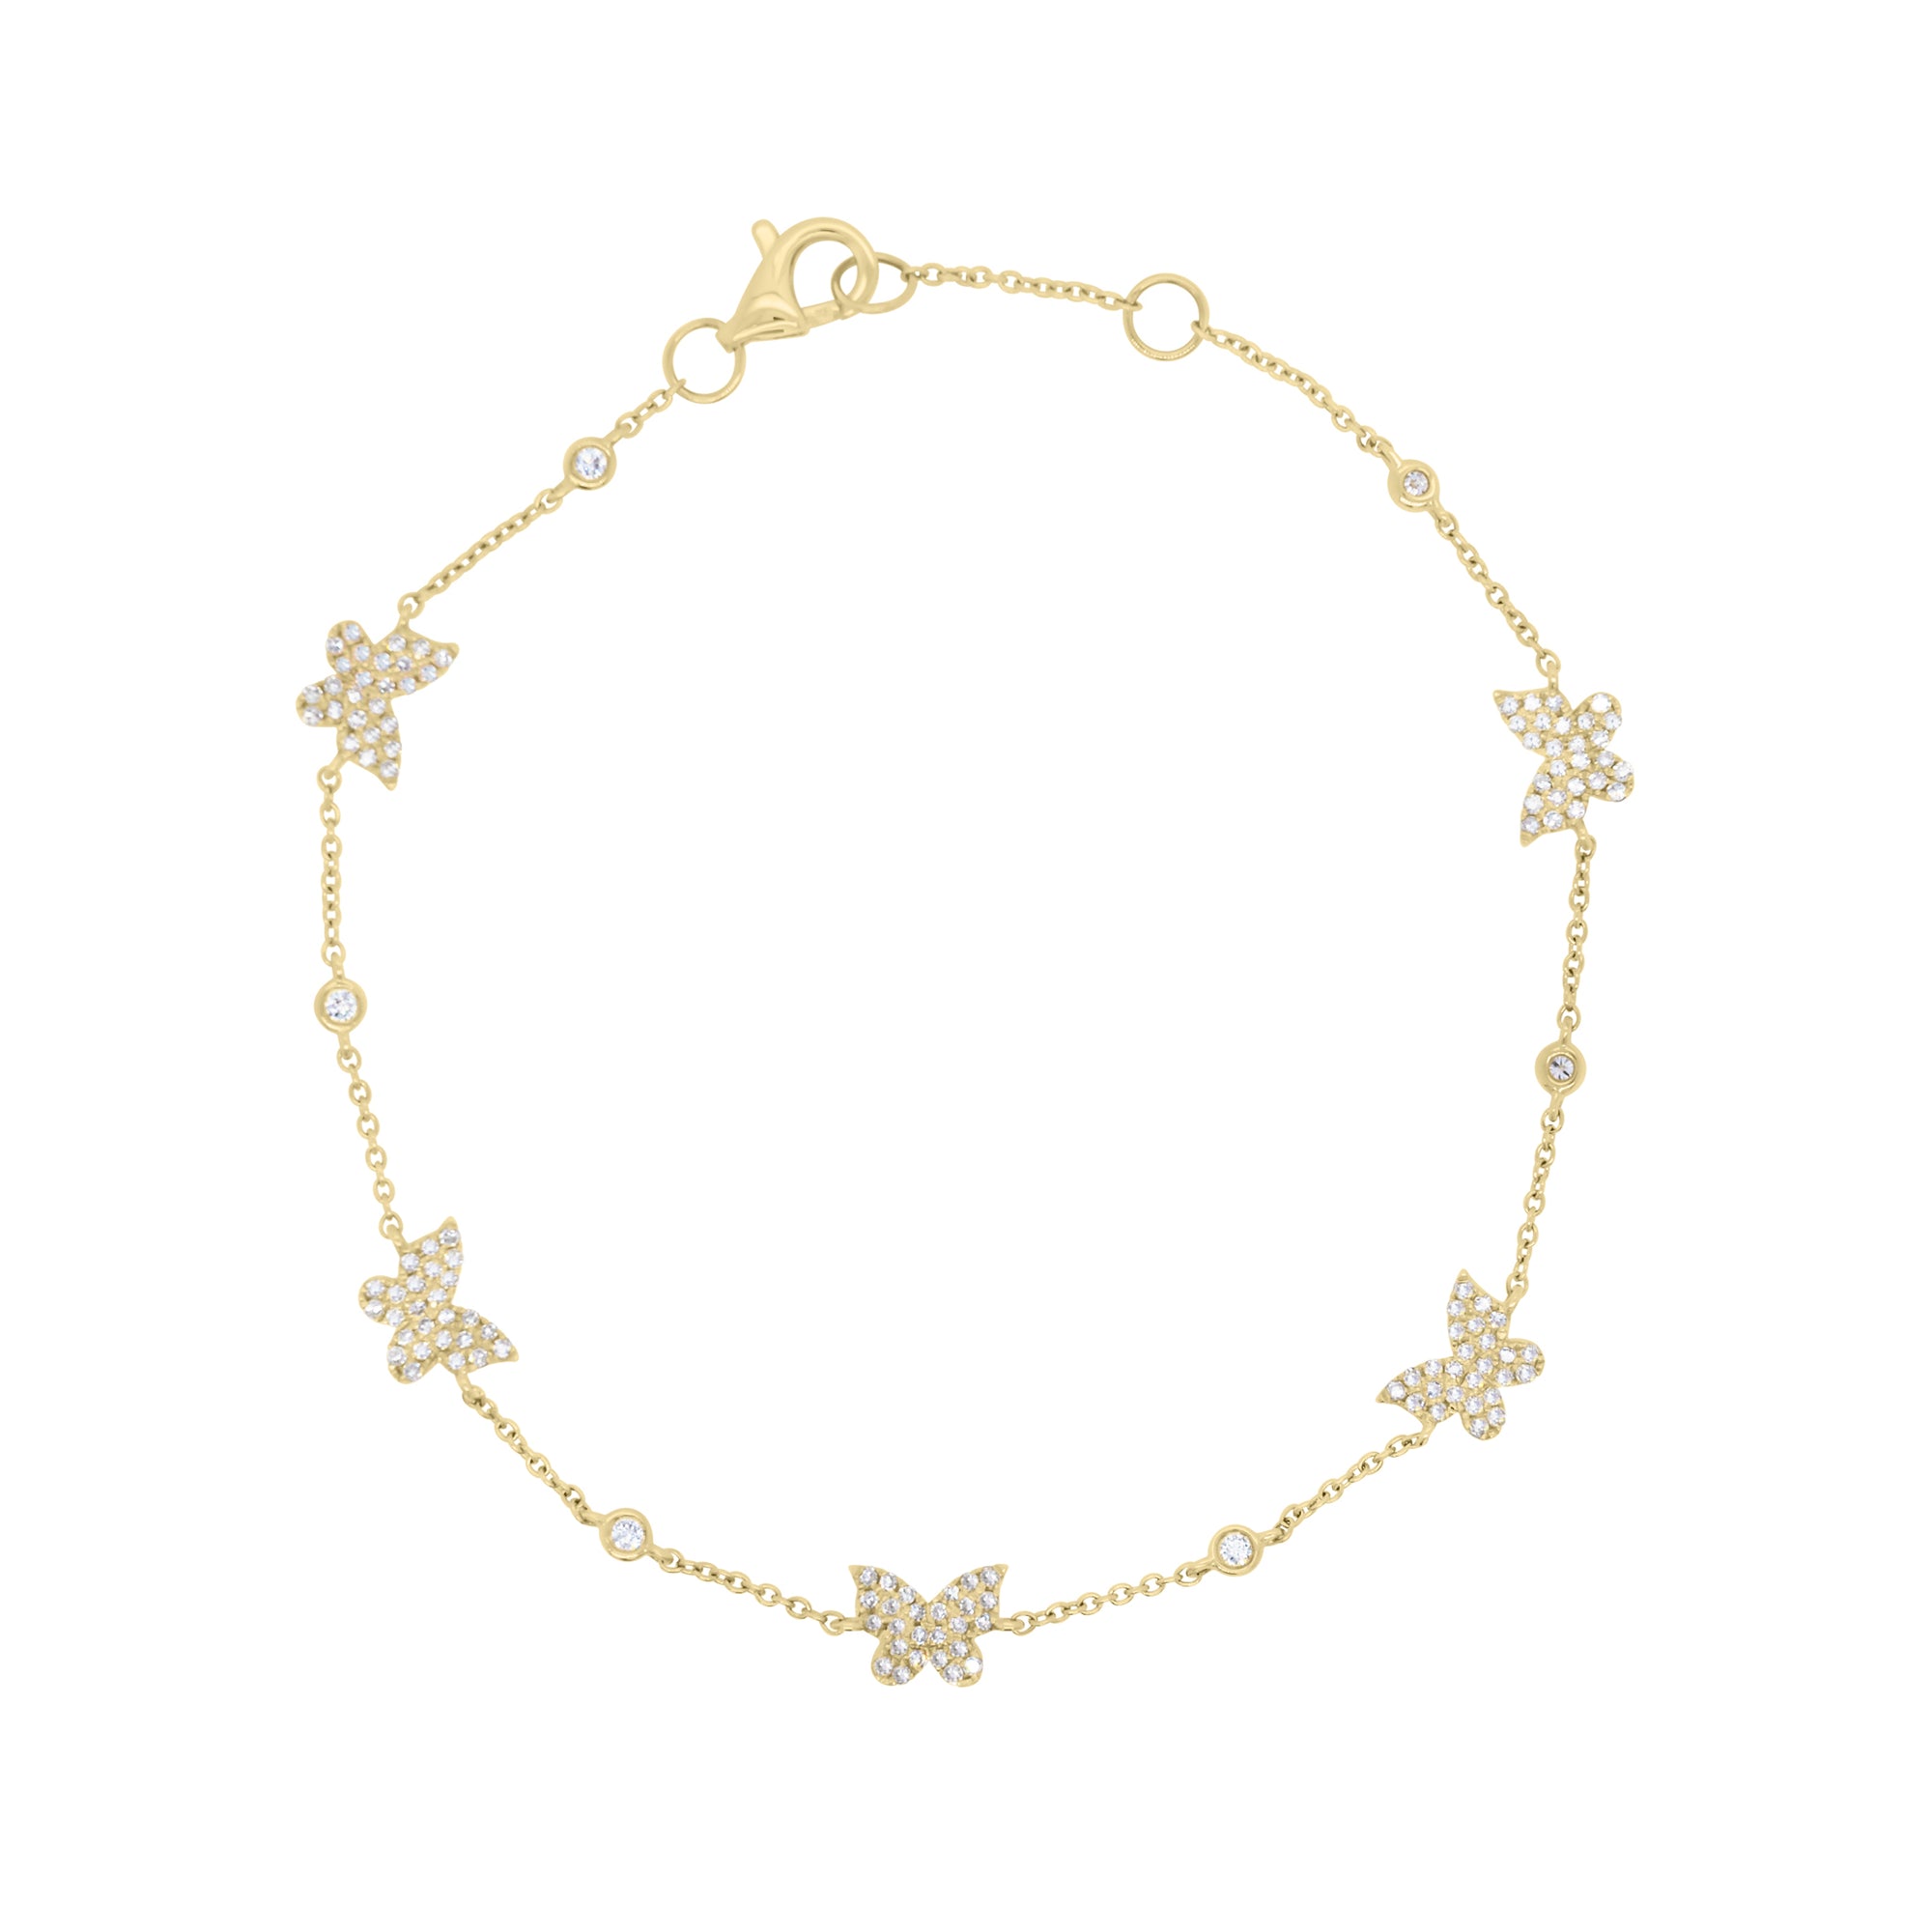 Diamond Butterflies Cable Chain Bracelet - 14K gold weighing 2.02 grams  - 136 round diamonds weighing 0.42 carats